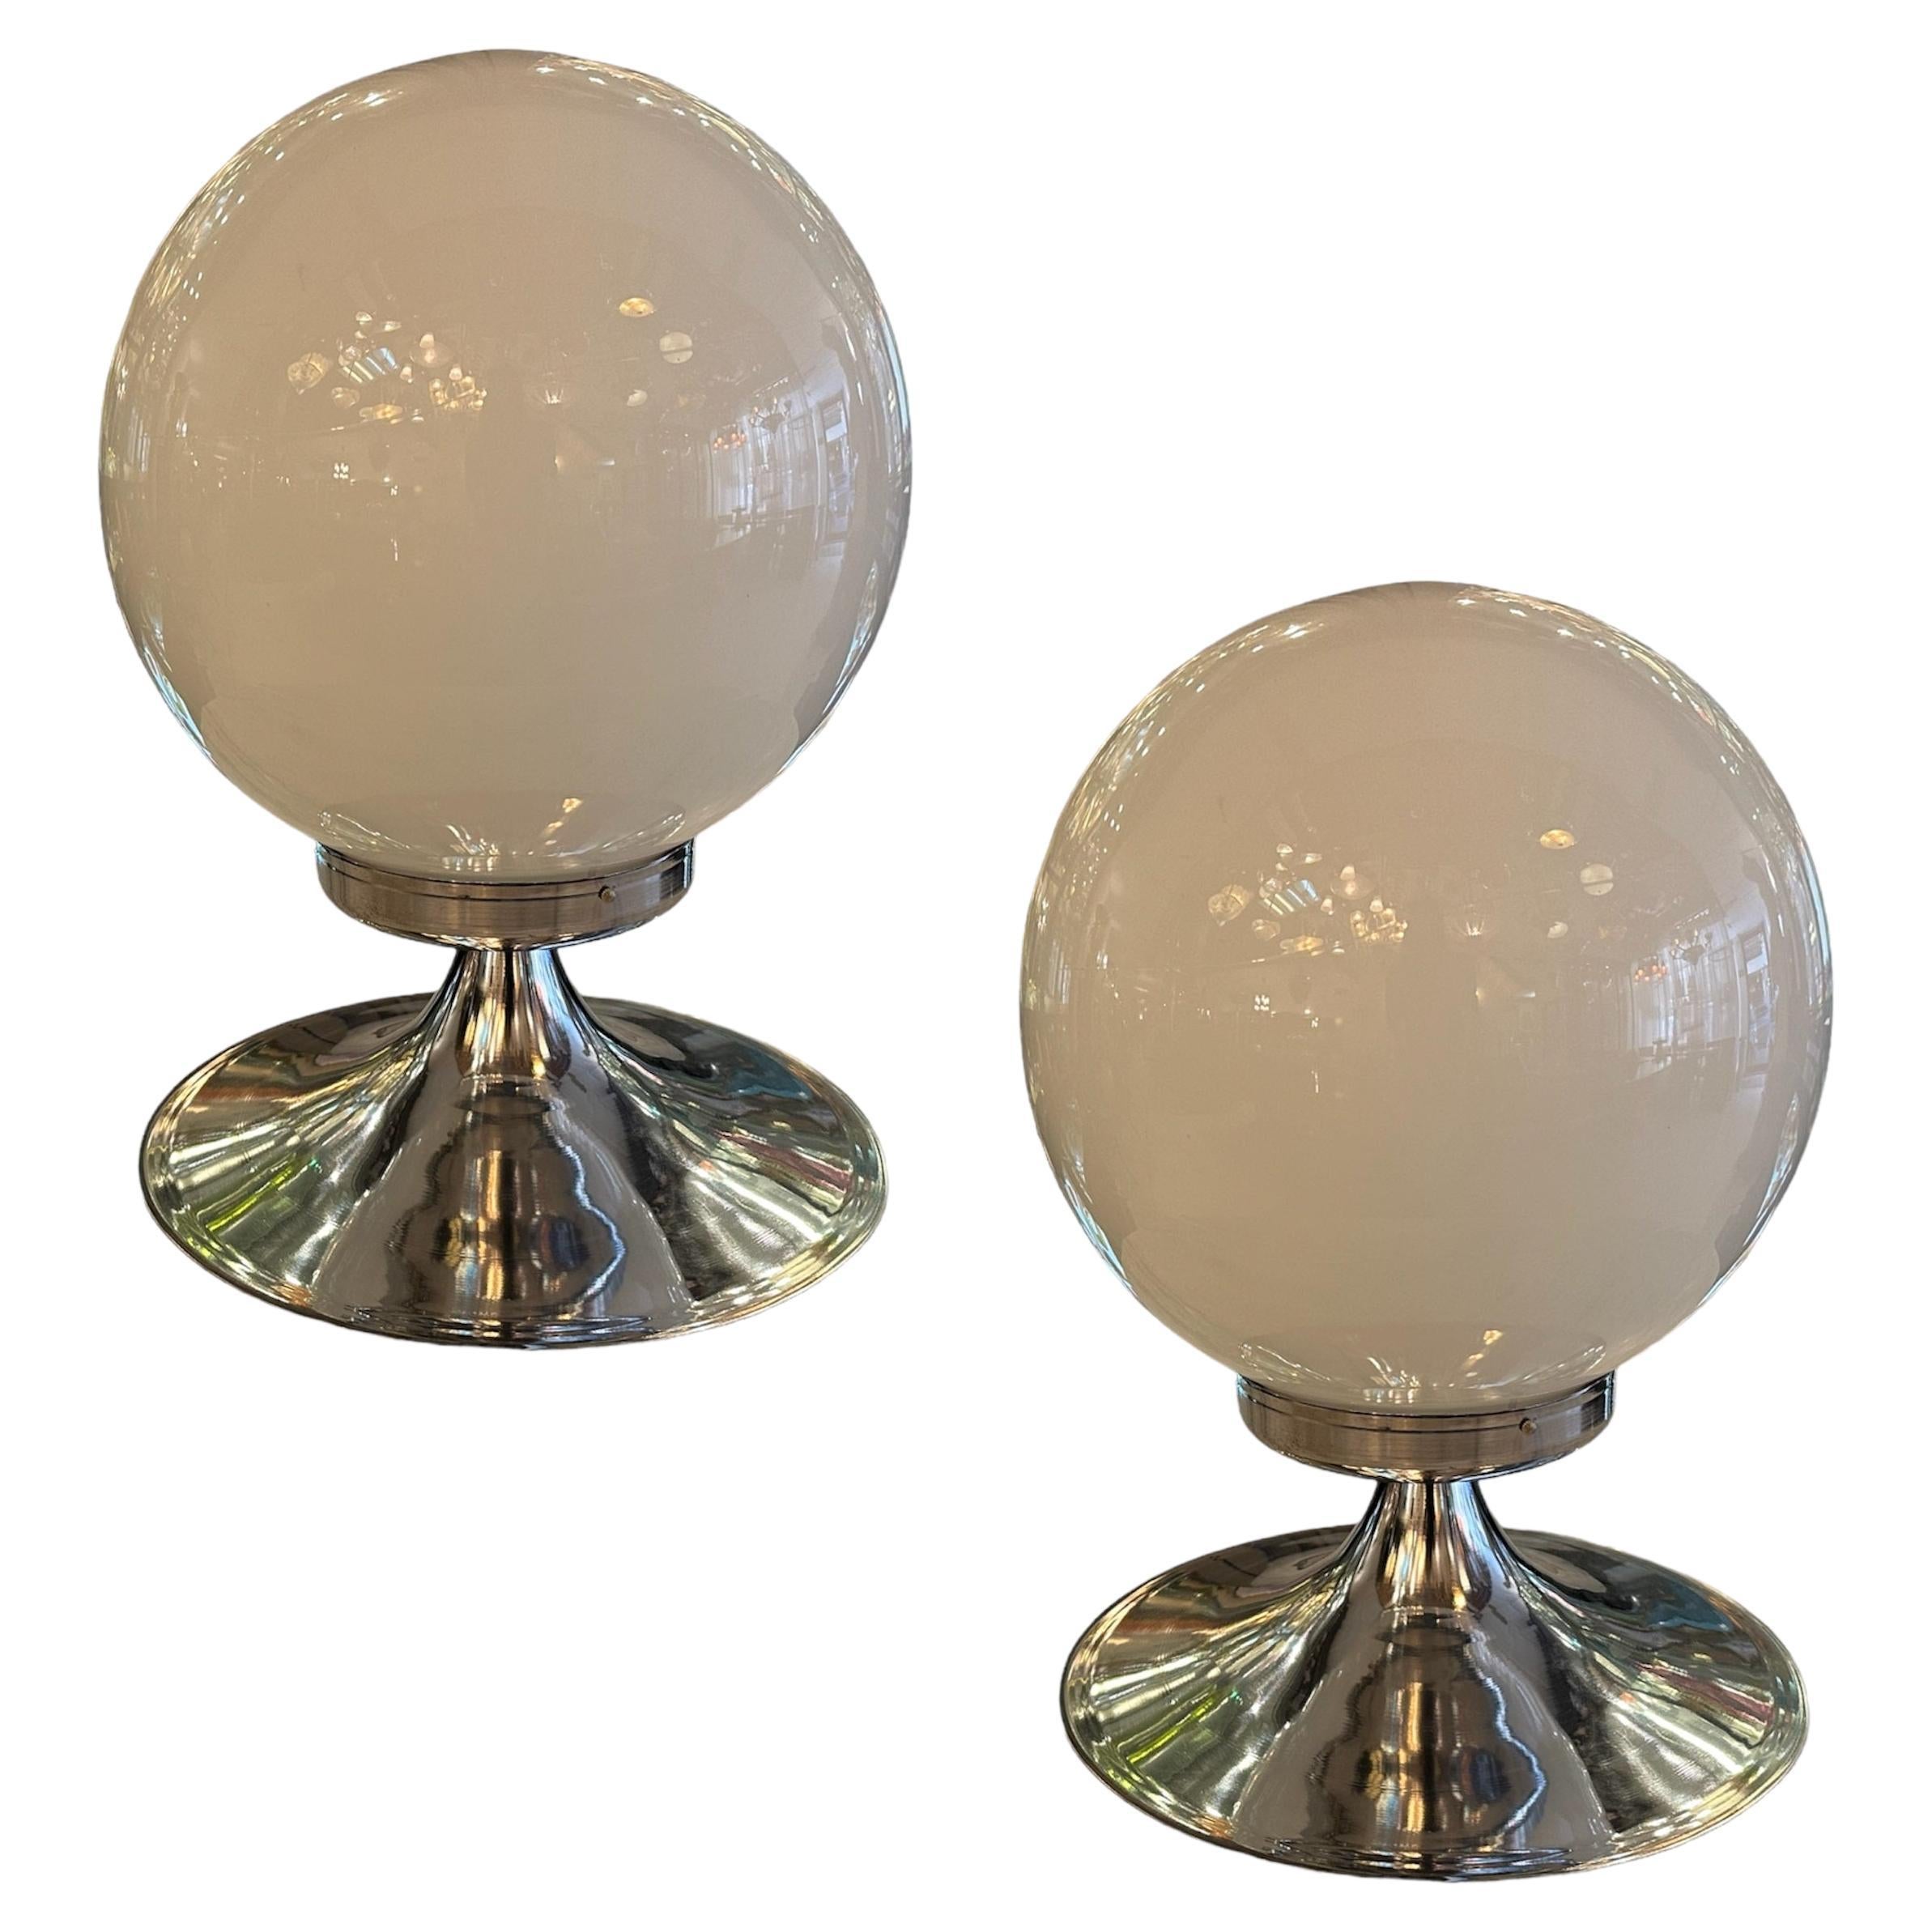 Amaizing Pair of Art Deco Table Lamps in opaline and chrome, German, 1930 For Sale